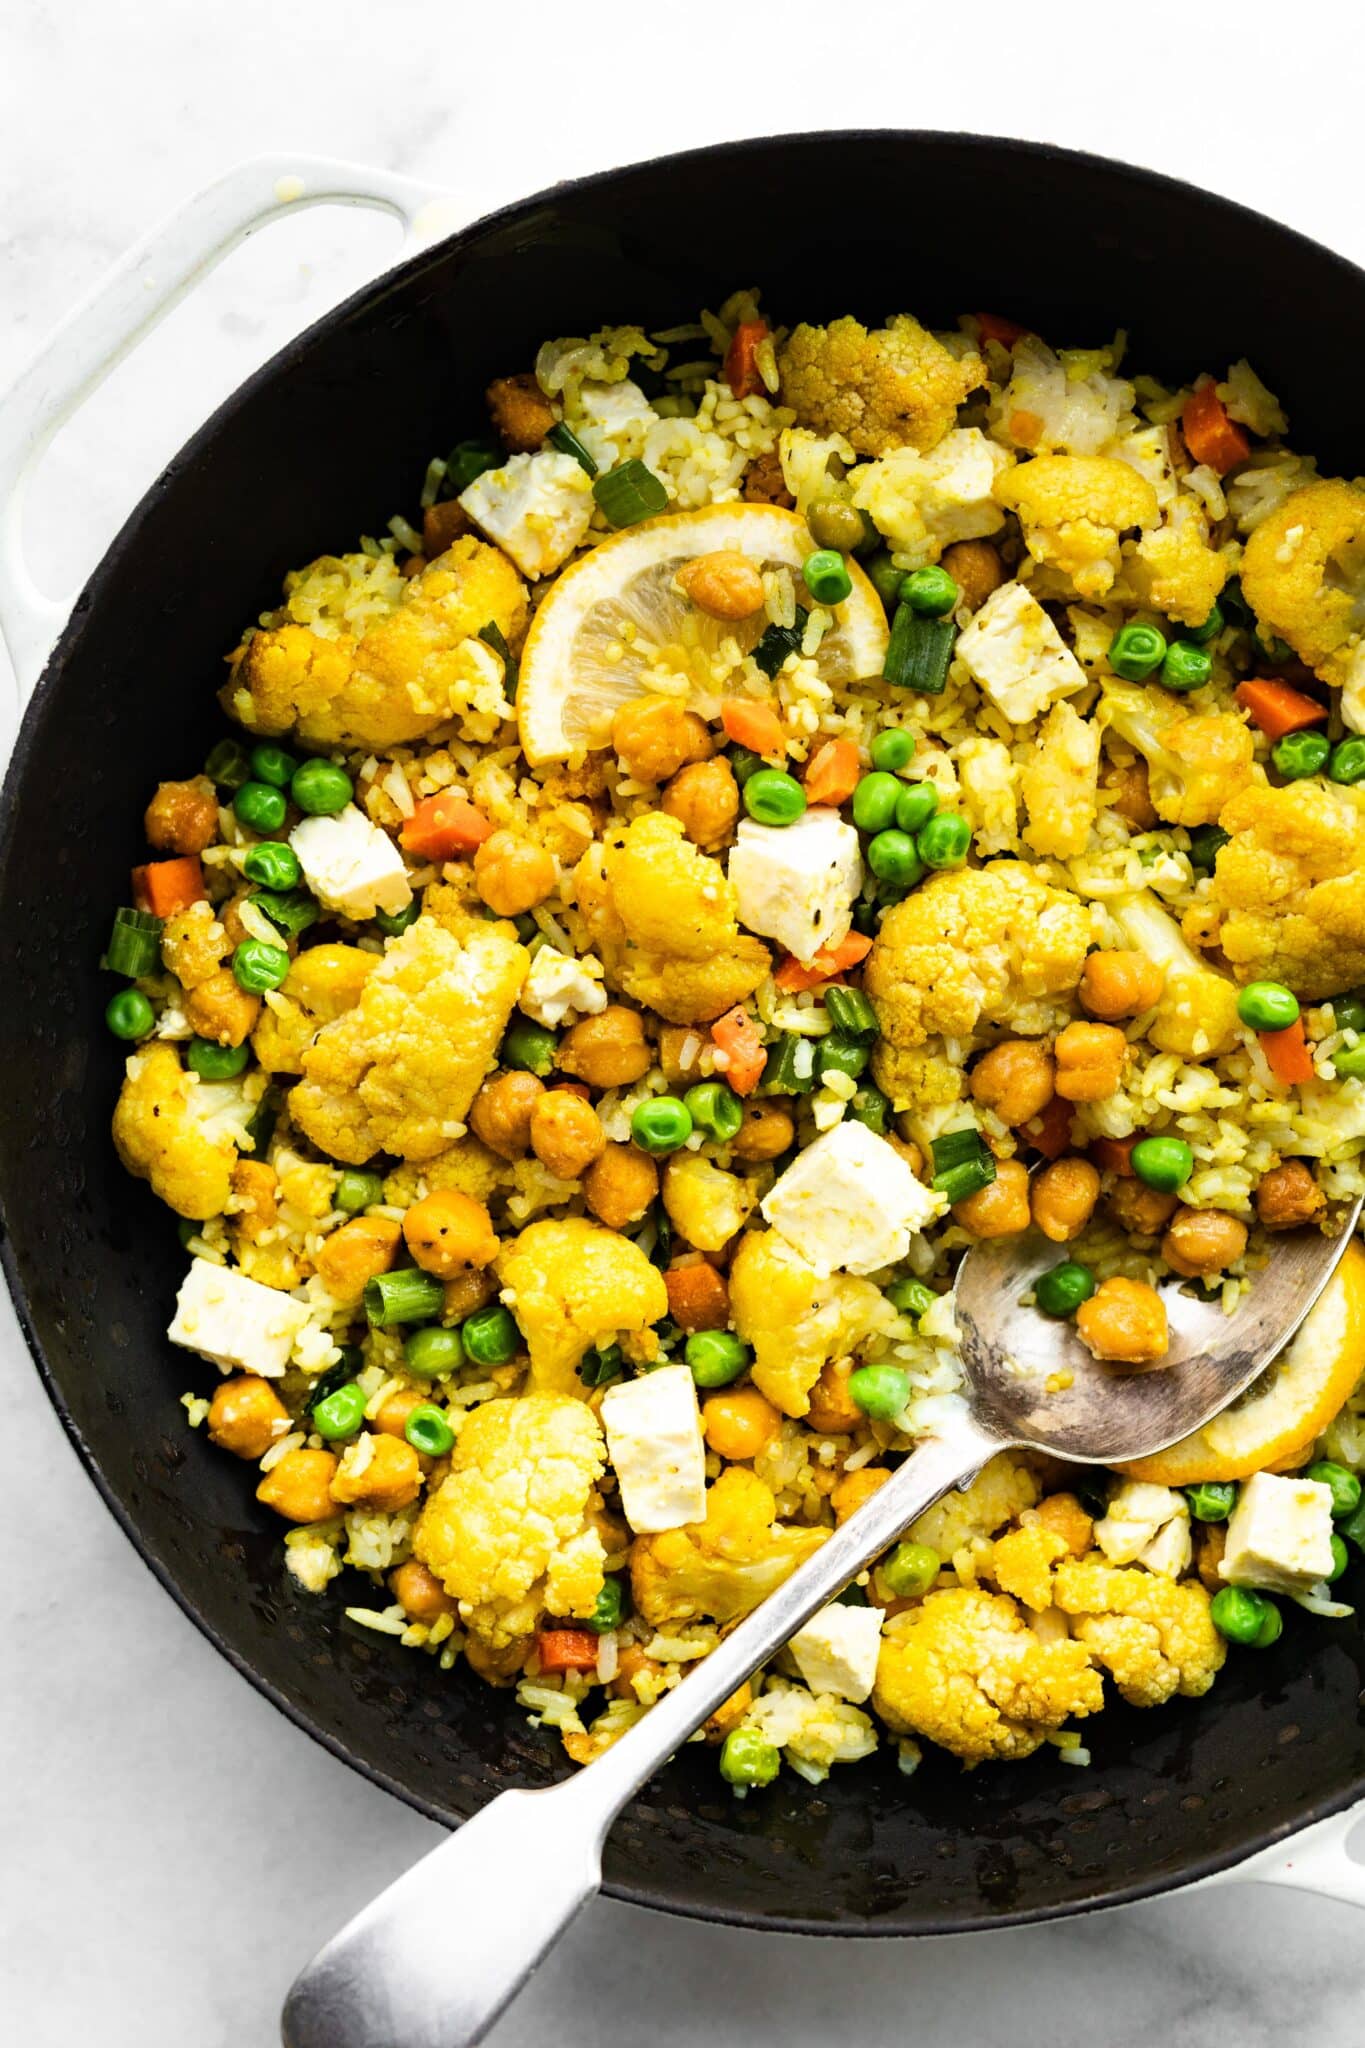 A spoon digging into a cast iron pan of vegetarian curried cauliflower bake with chickpeas.